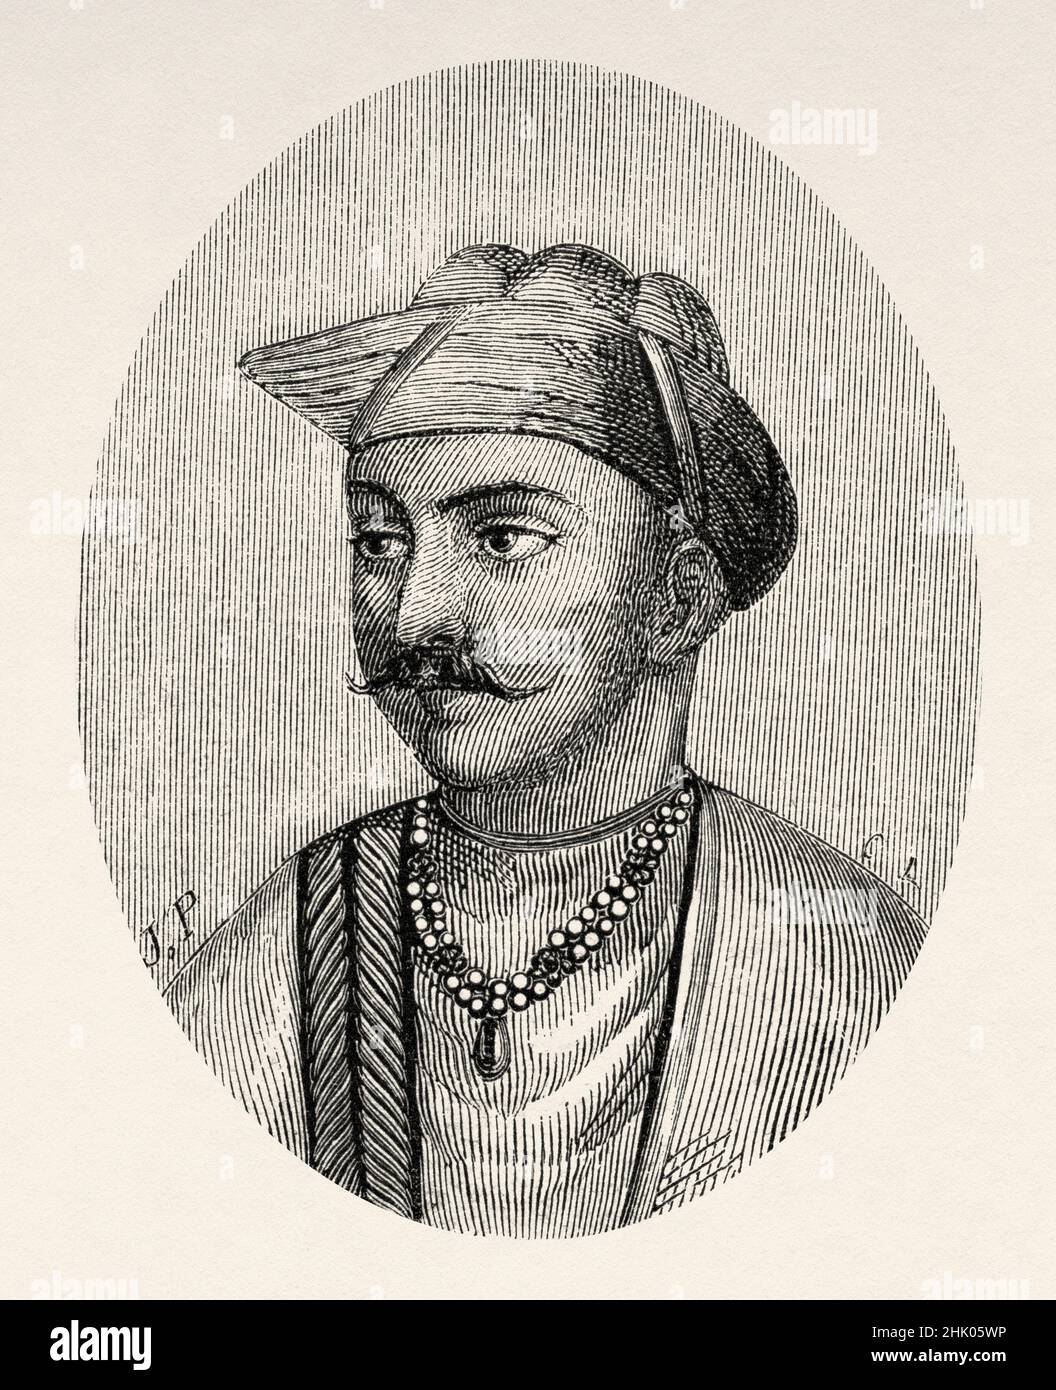 Portrait of Nana Sahib (1824 – disappeared 1857) born as Dhondu Pant was an Indian Maratha aristocrat, he led the Cawnpore rebellion during the Indian Rebellion of 1857, India, Asia. Old 19th century engraved illustration from Trip to Punjab and Kashmir by Guillaume Lejean, Le Tour du Monde 1870 Stock Photo